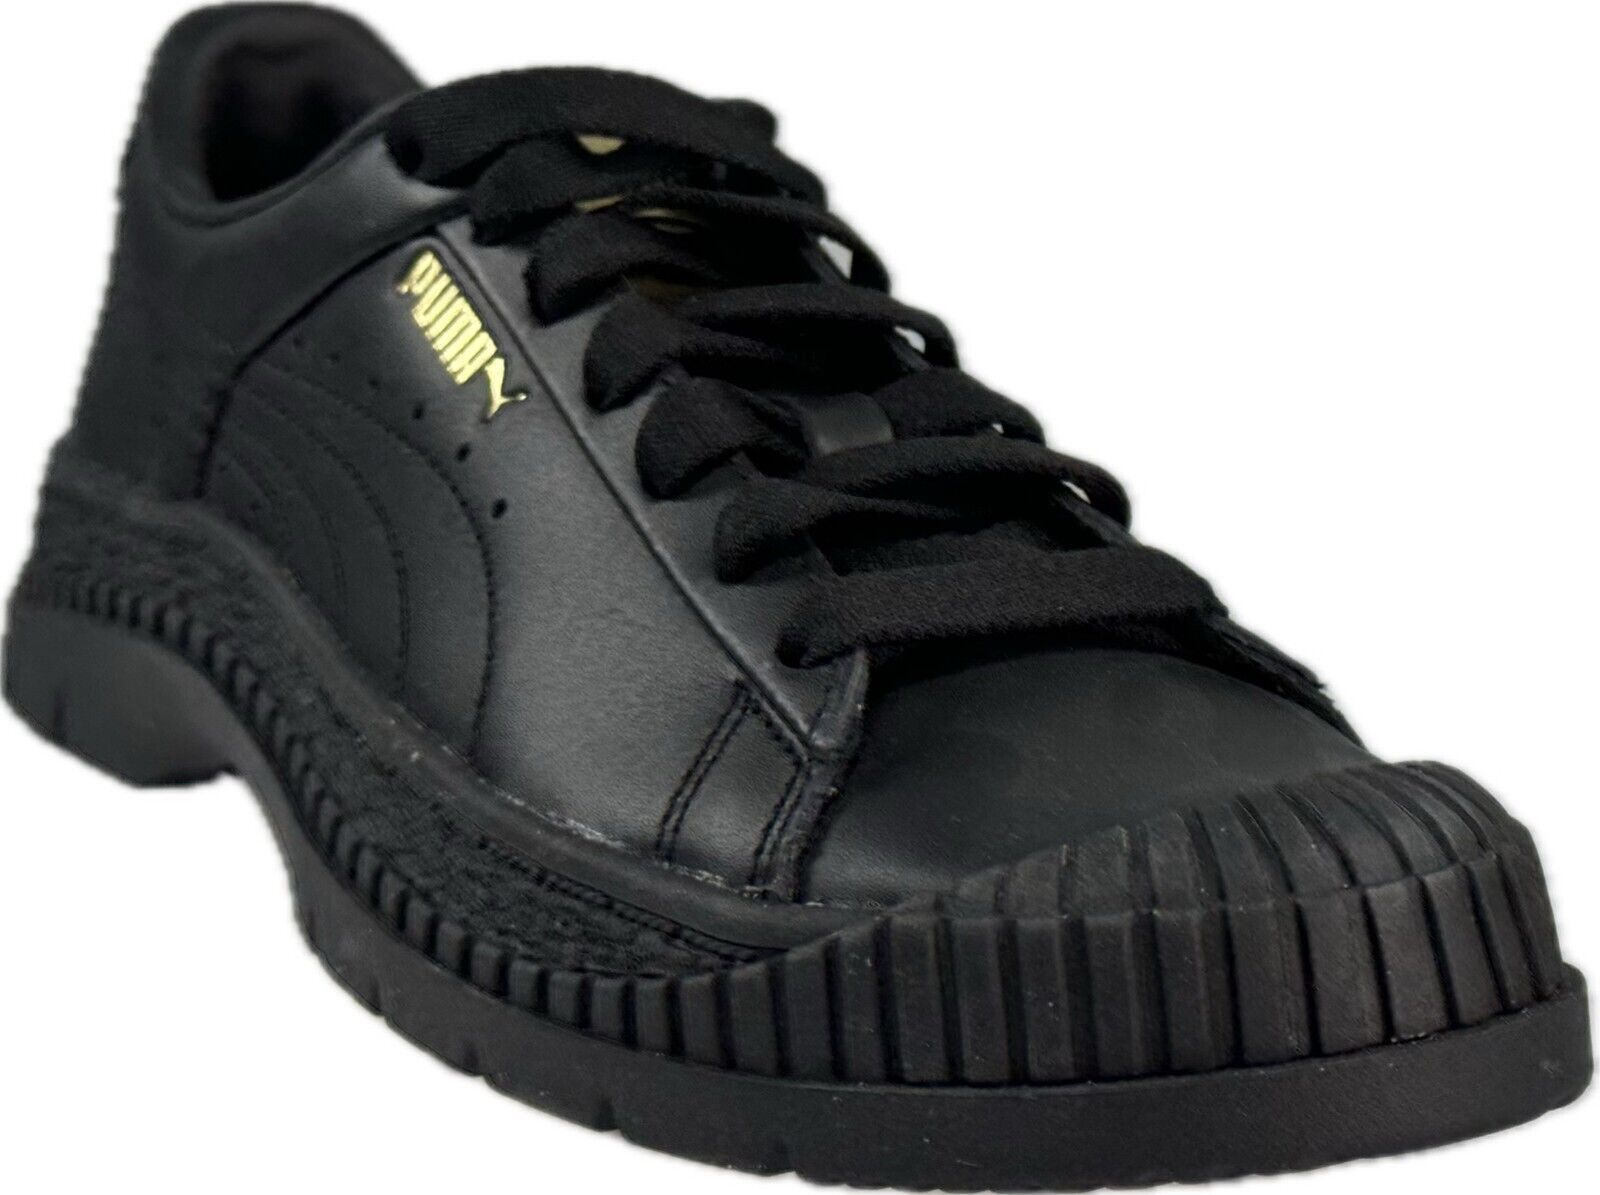 Primary image for PUMA Women's Black Utility Leather Sneakers SZ 7, 37098203